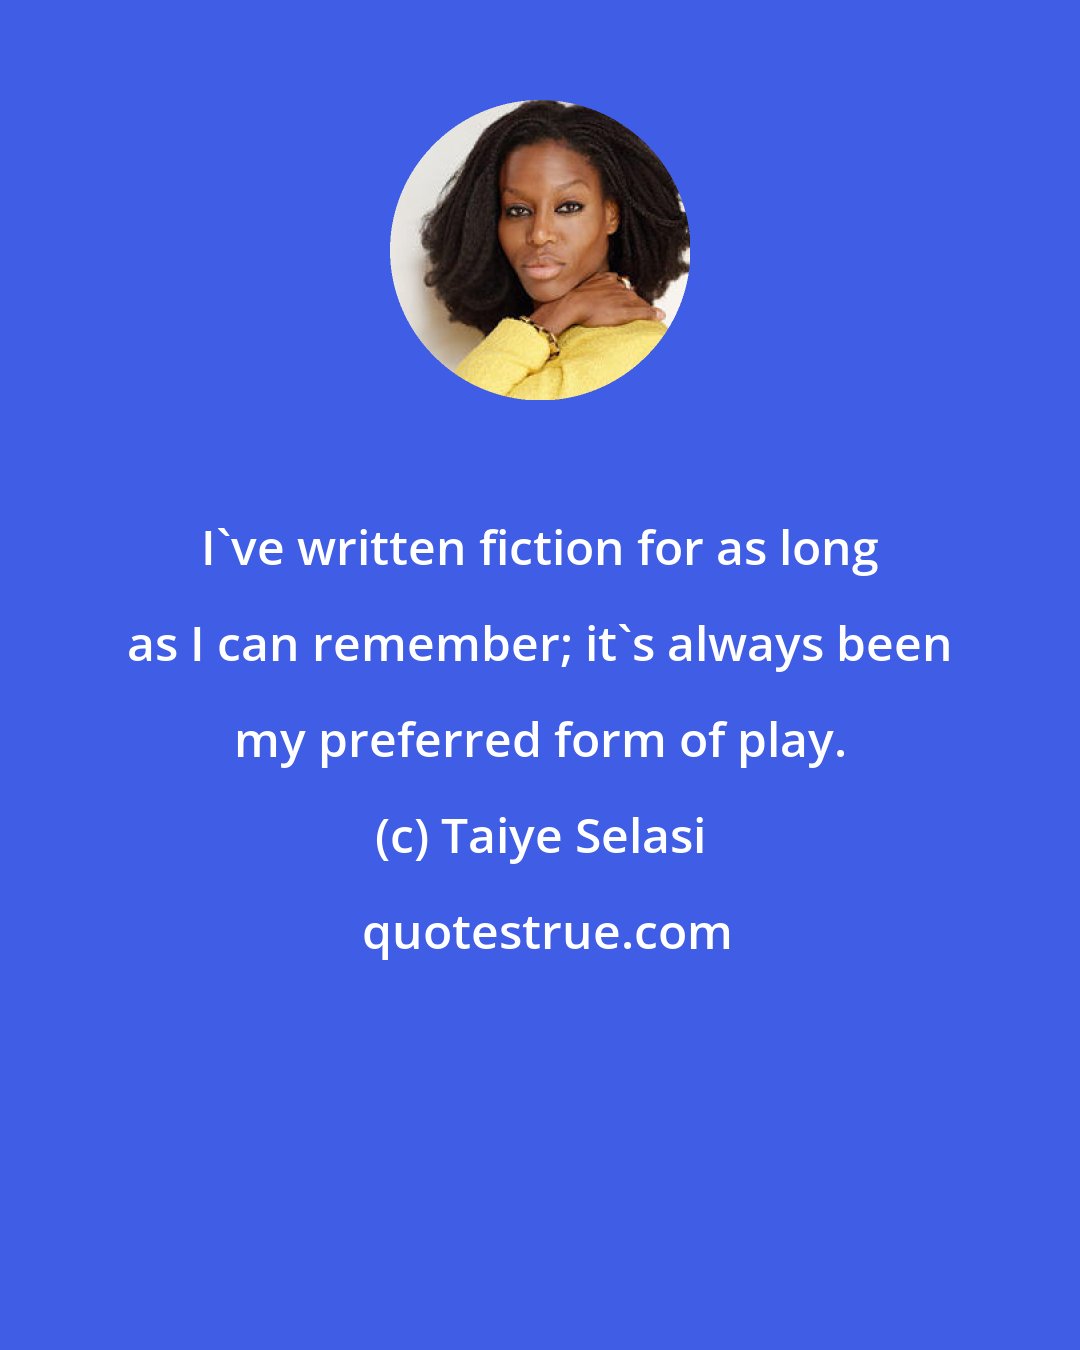 Taiye Selasi: I've written fiction for as long as I can remember; it's always been my preferred form of play.